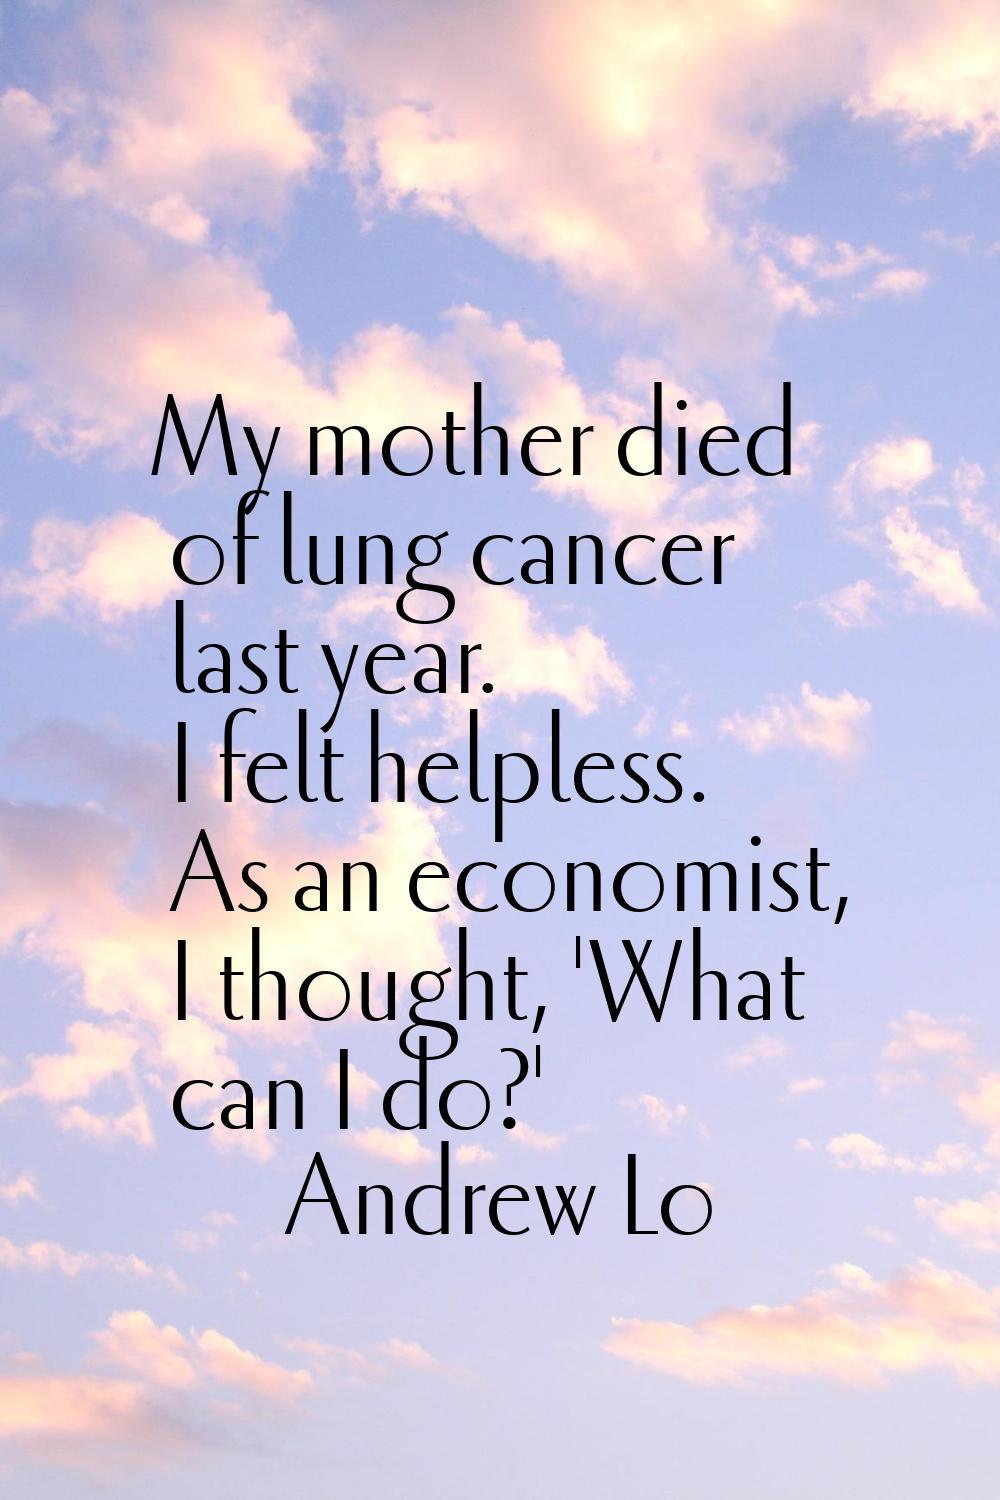 My mother died of lung cancer last year. I felt helpless. As an economist, I thought, 'What can I d